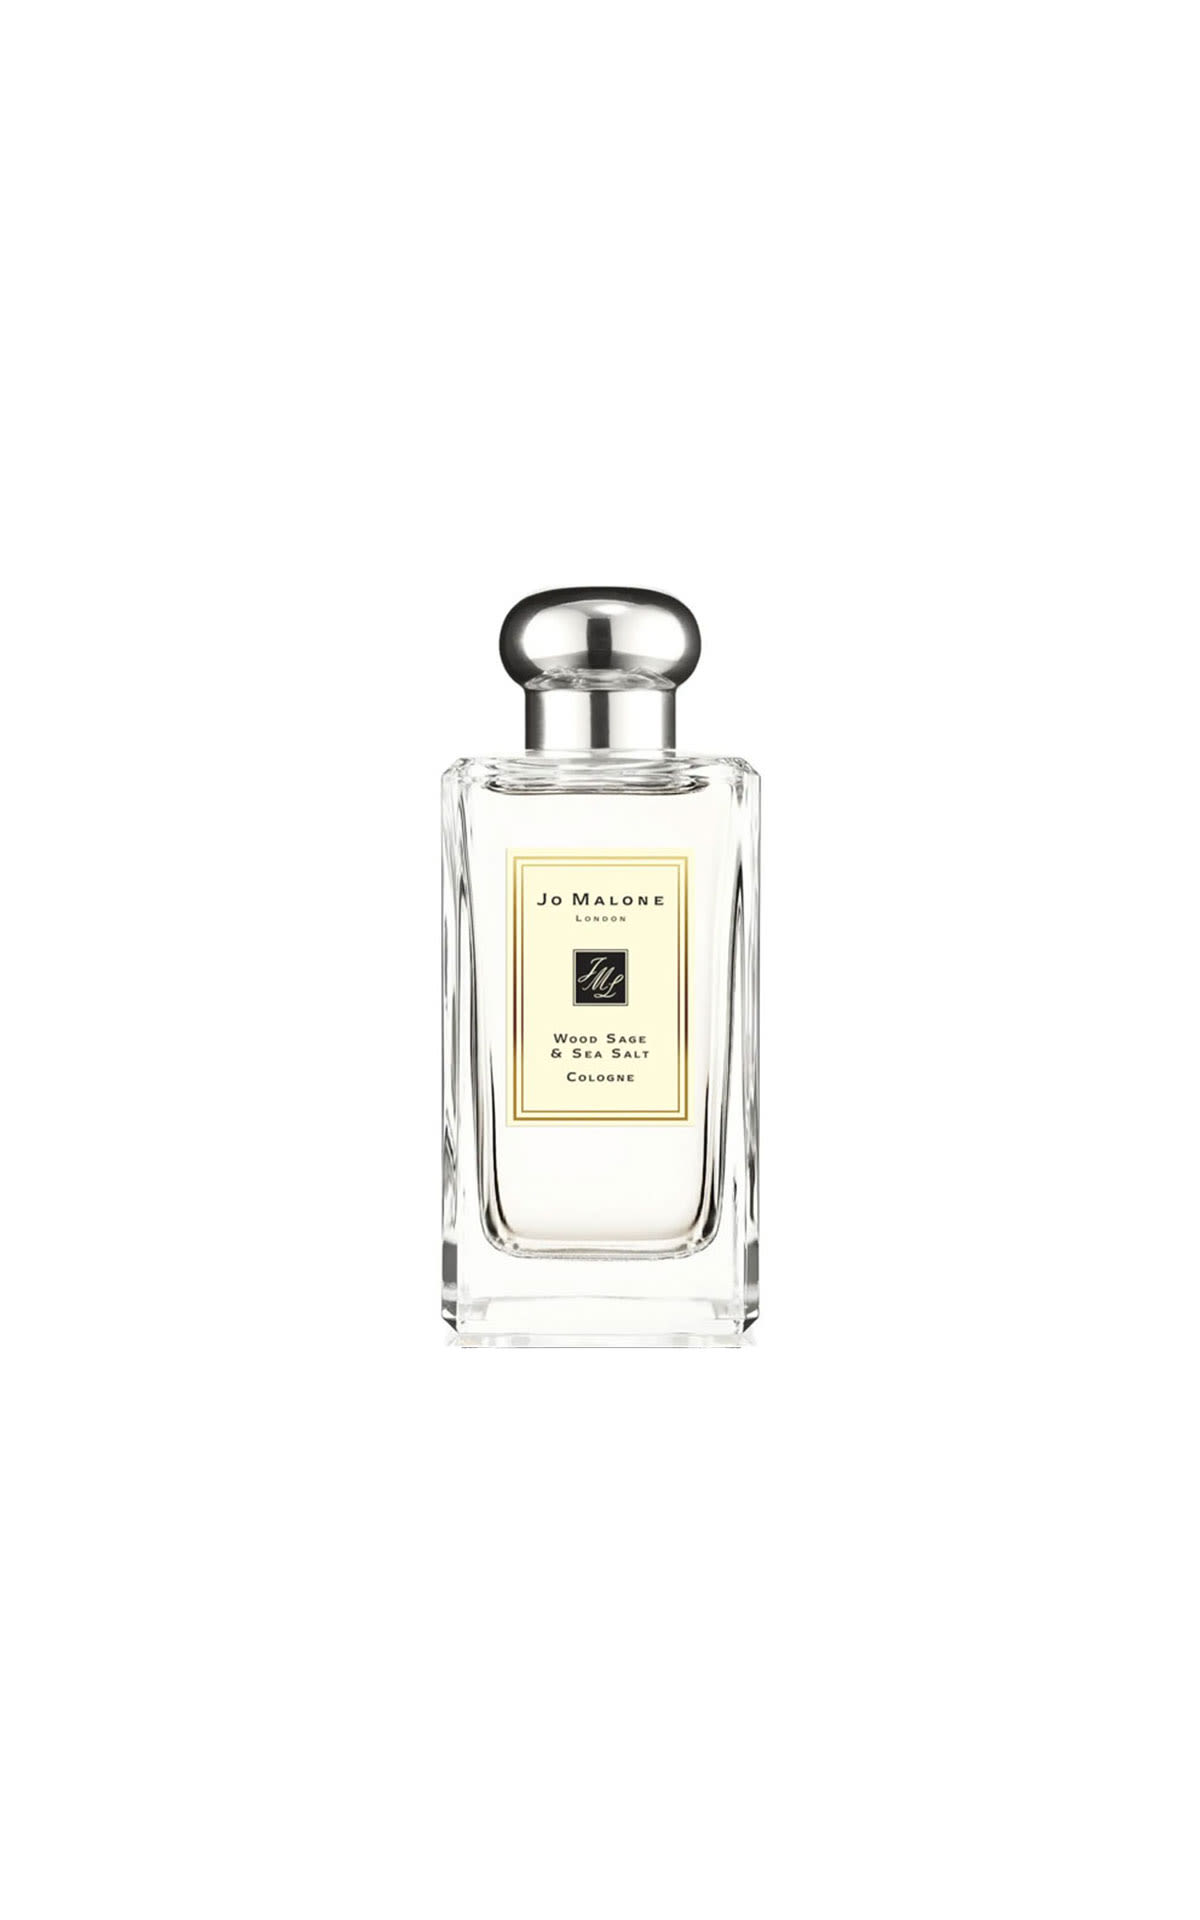 Jo Malone Wood sage and sea salt cologne 100ml from Bicester Village